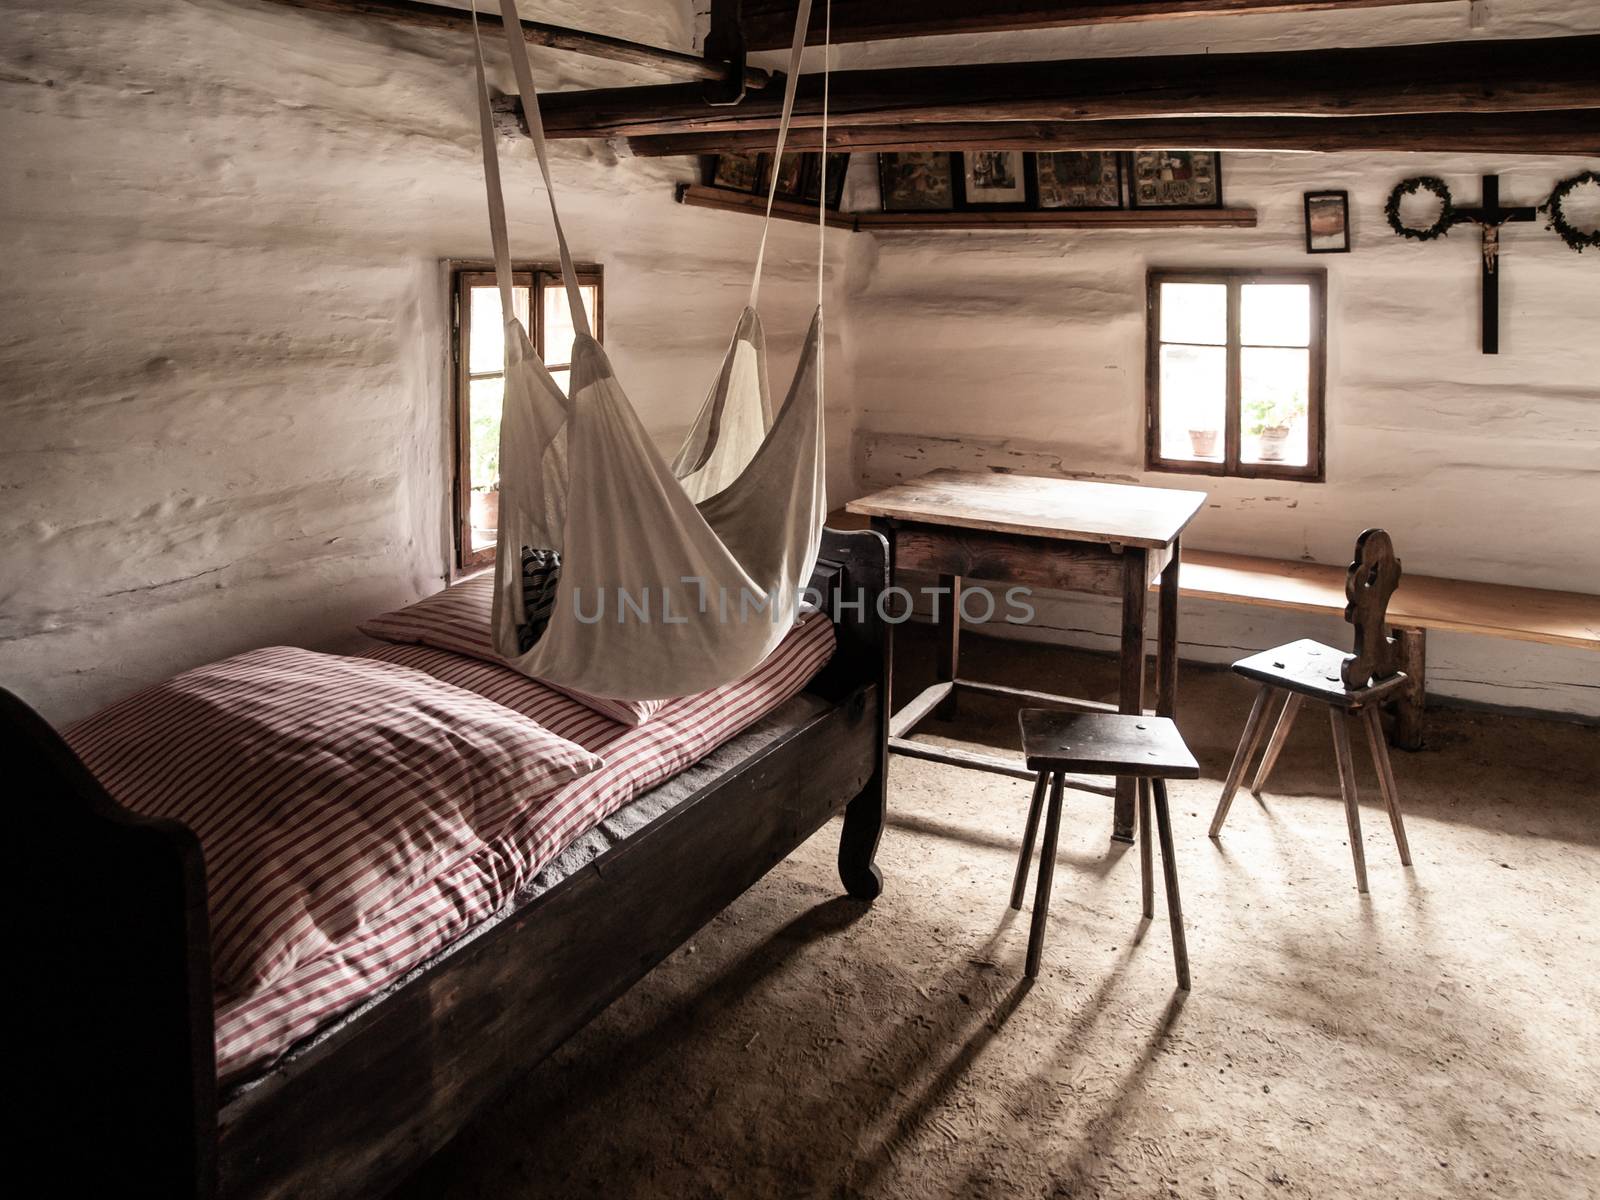 Vintage room with bed, table and chairs in old rural house. Sepia style image by pyty